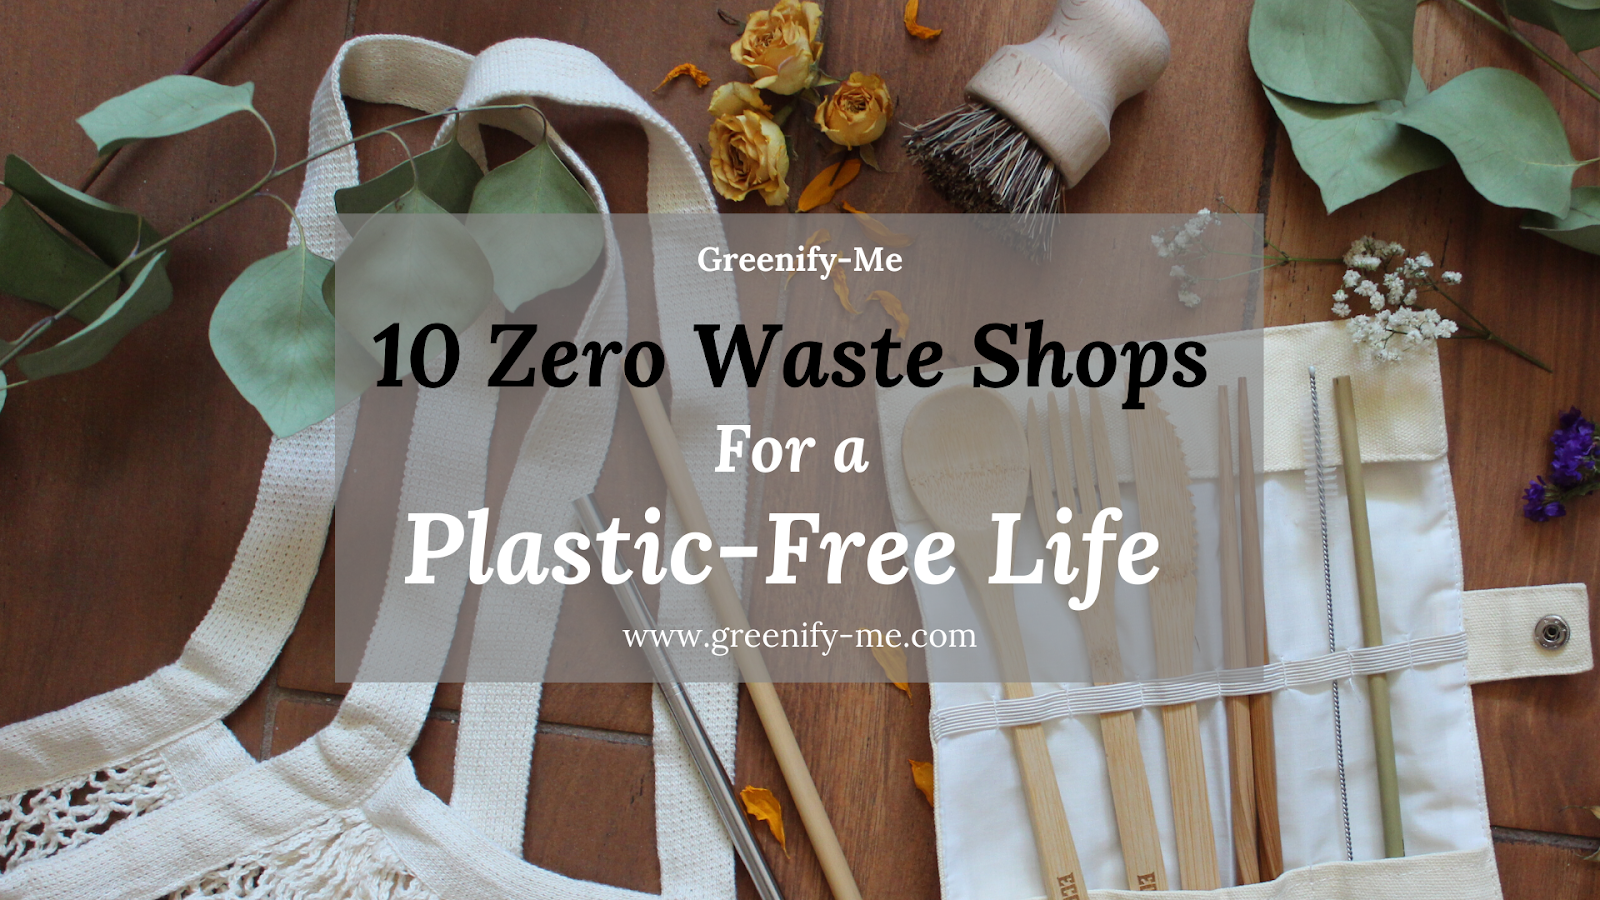 10 Zero Waste Shops For a Plastic-Free Life